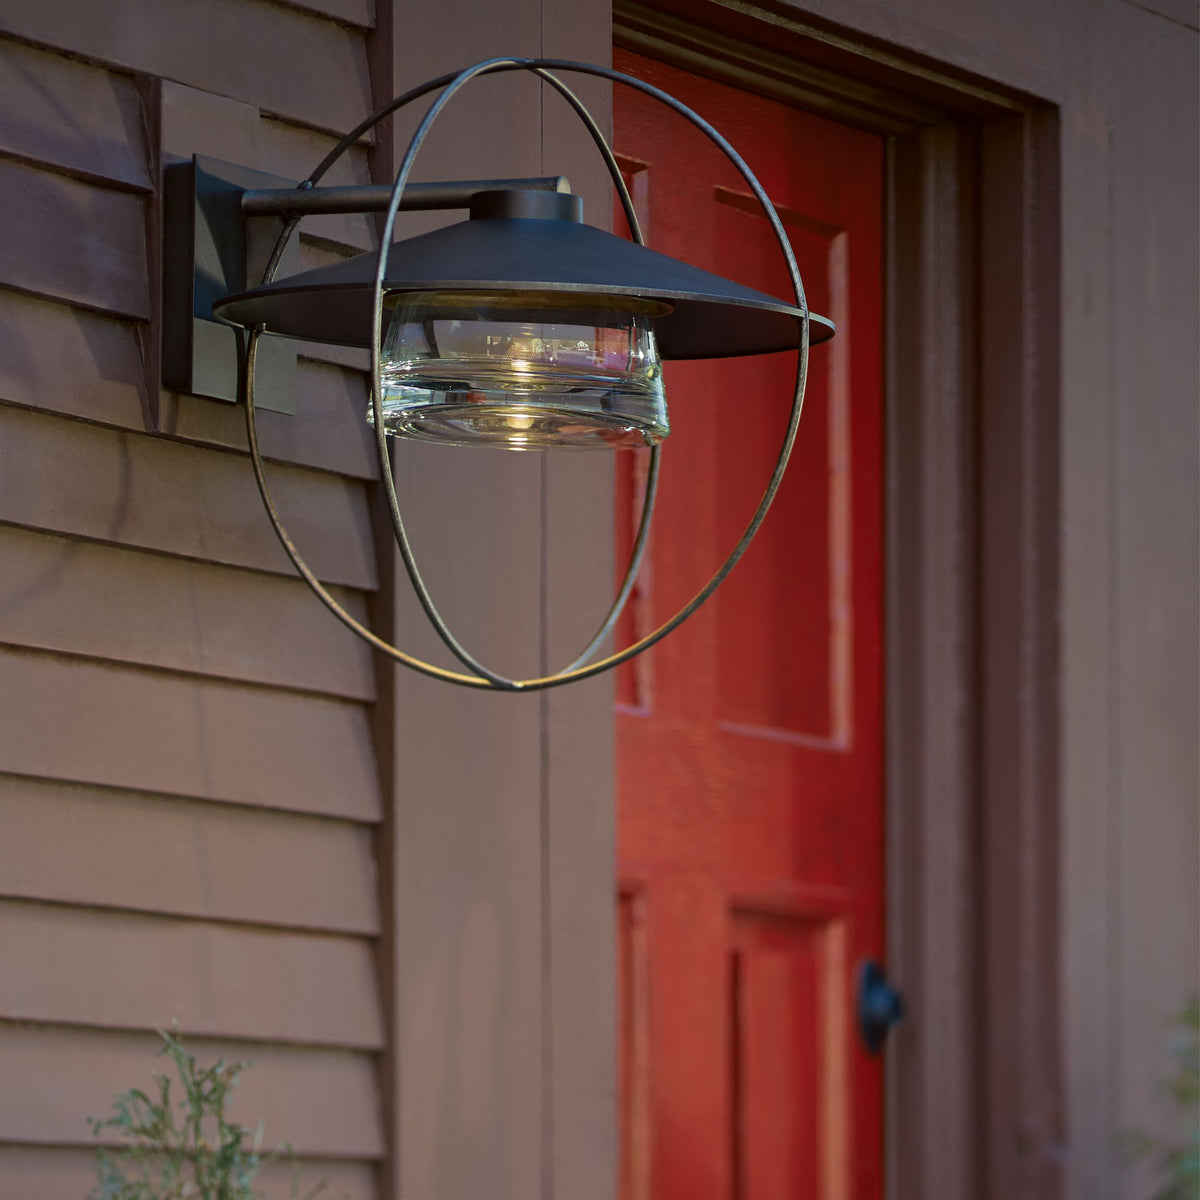 Hubbardton Forge Halo Small Outdoor Wall Sconce